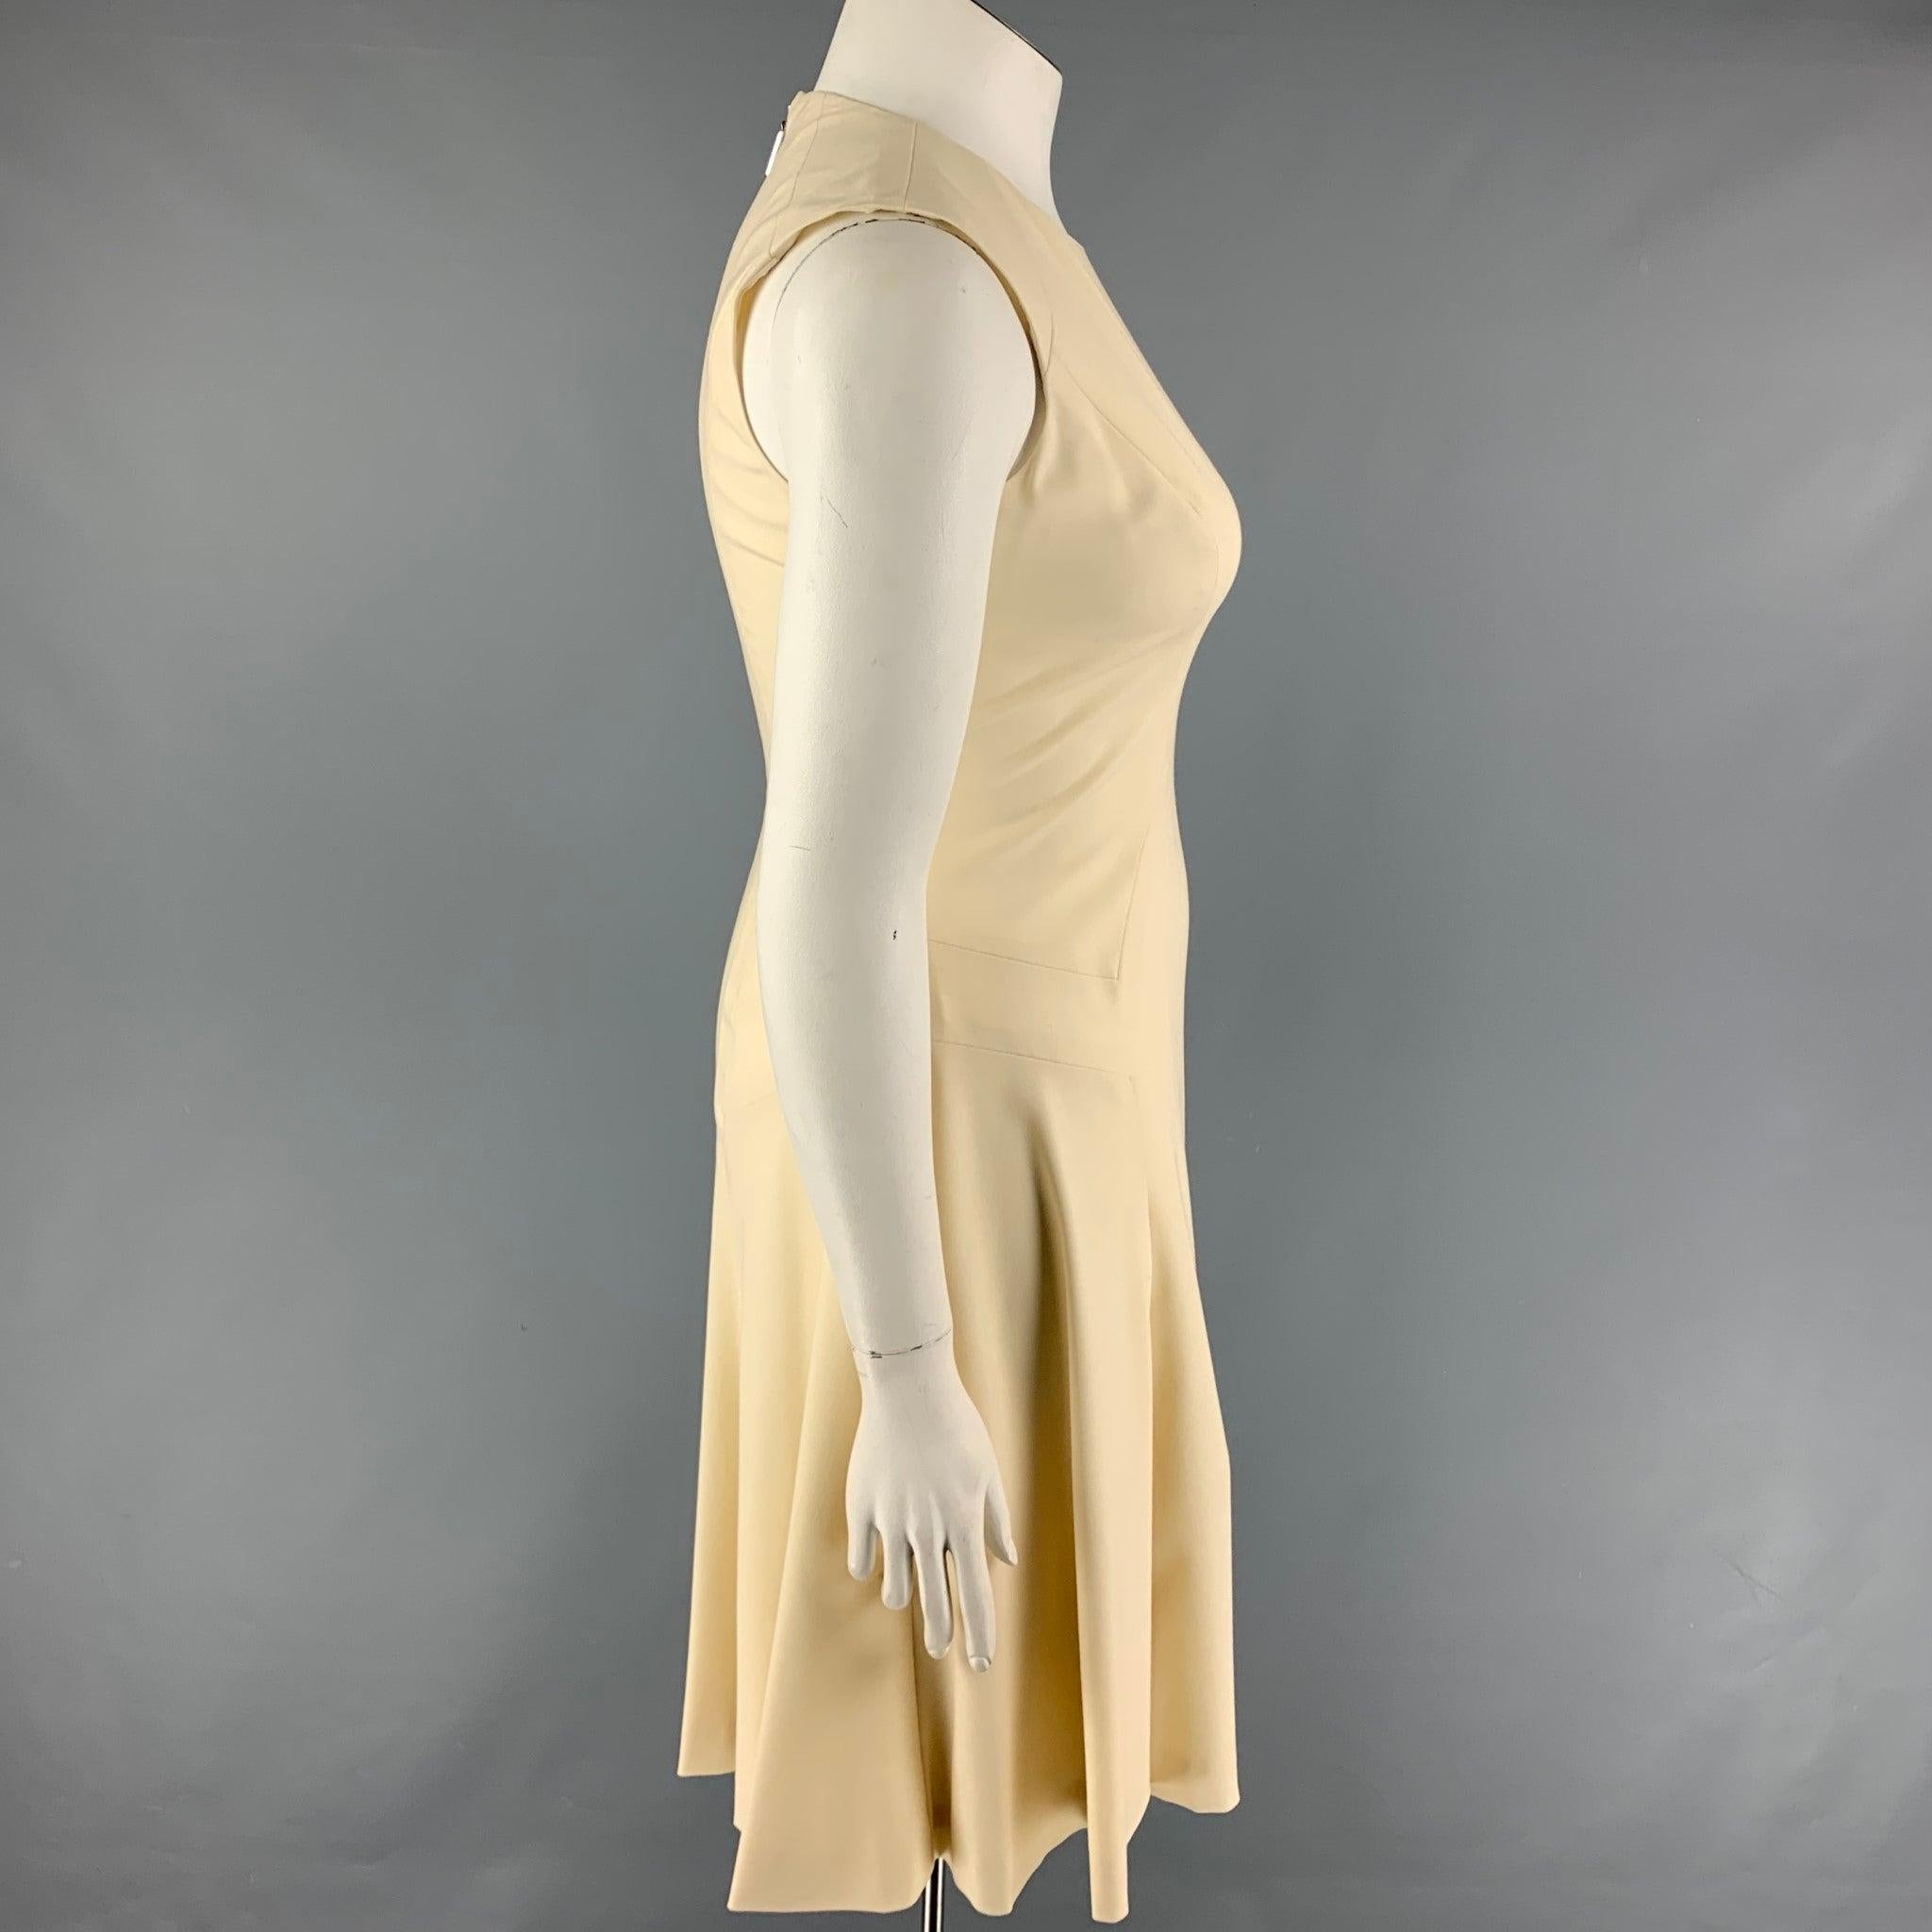 PRABAL GURUNG dress comes in a cream wool with a silk lining featuring an a-line style, sleeveless, and a back zip up closure. Made in USA.
New With Tags.
 

Marked:   10 

Measurements: 
 
Shoulder: 14.5 inches  Bust:
34 inches  Waist: 29 inches 